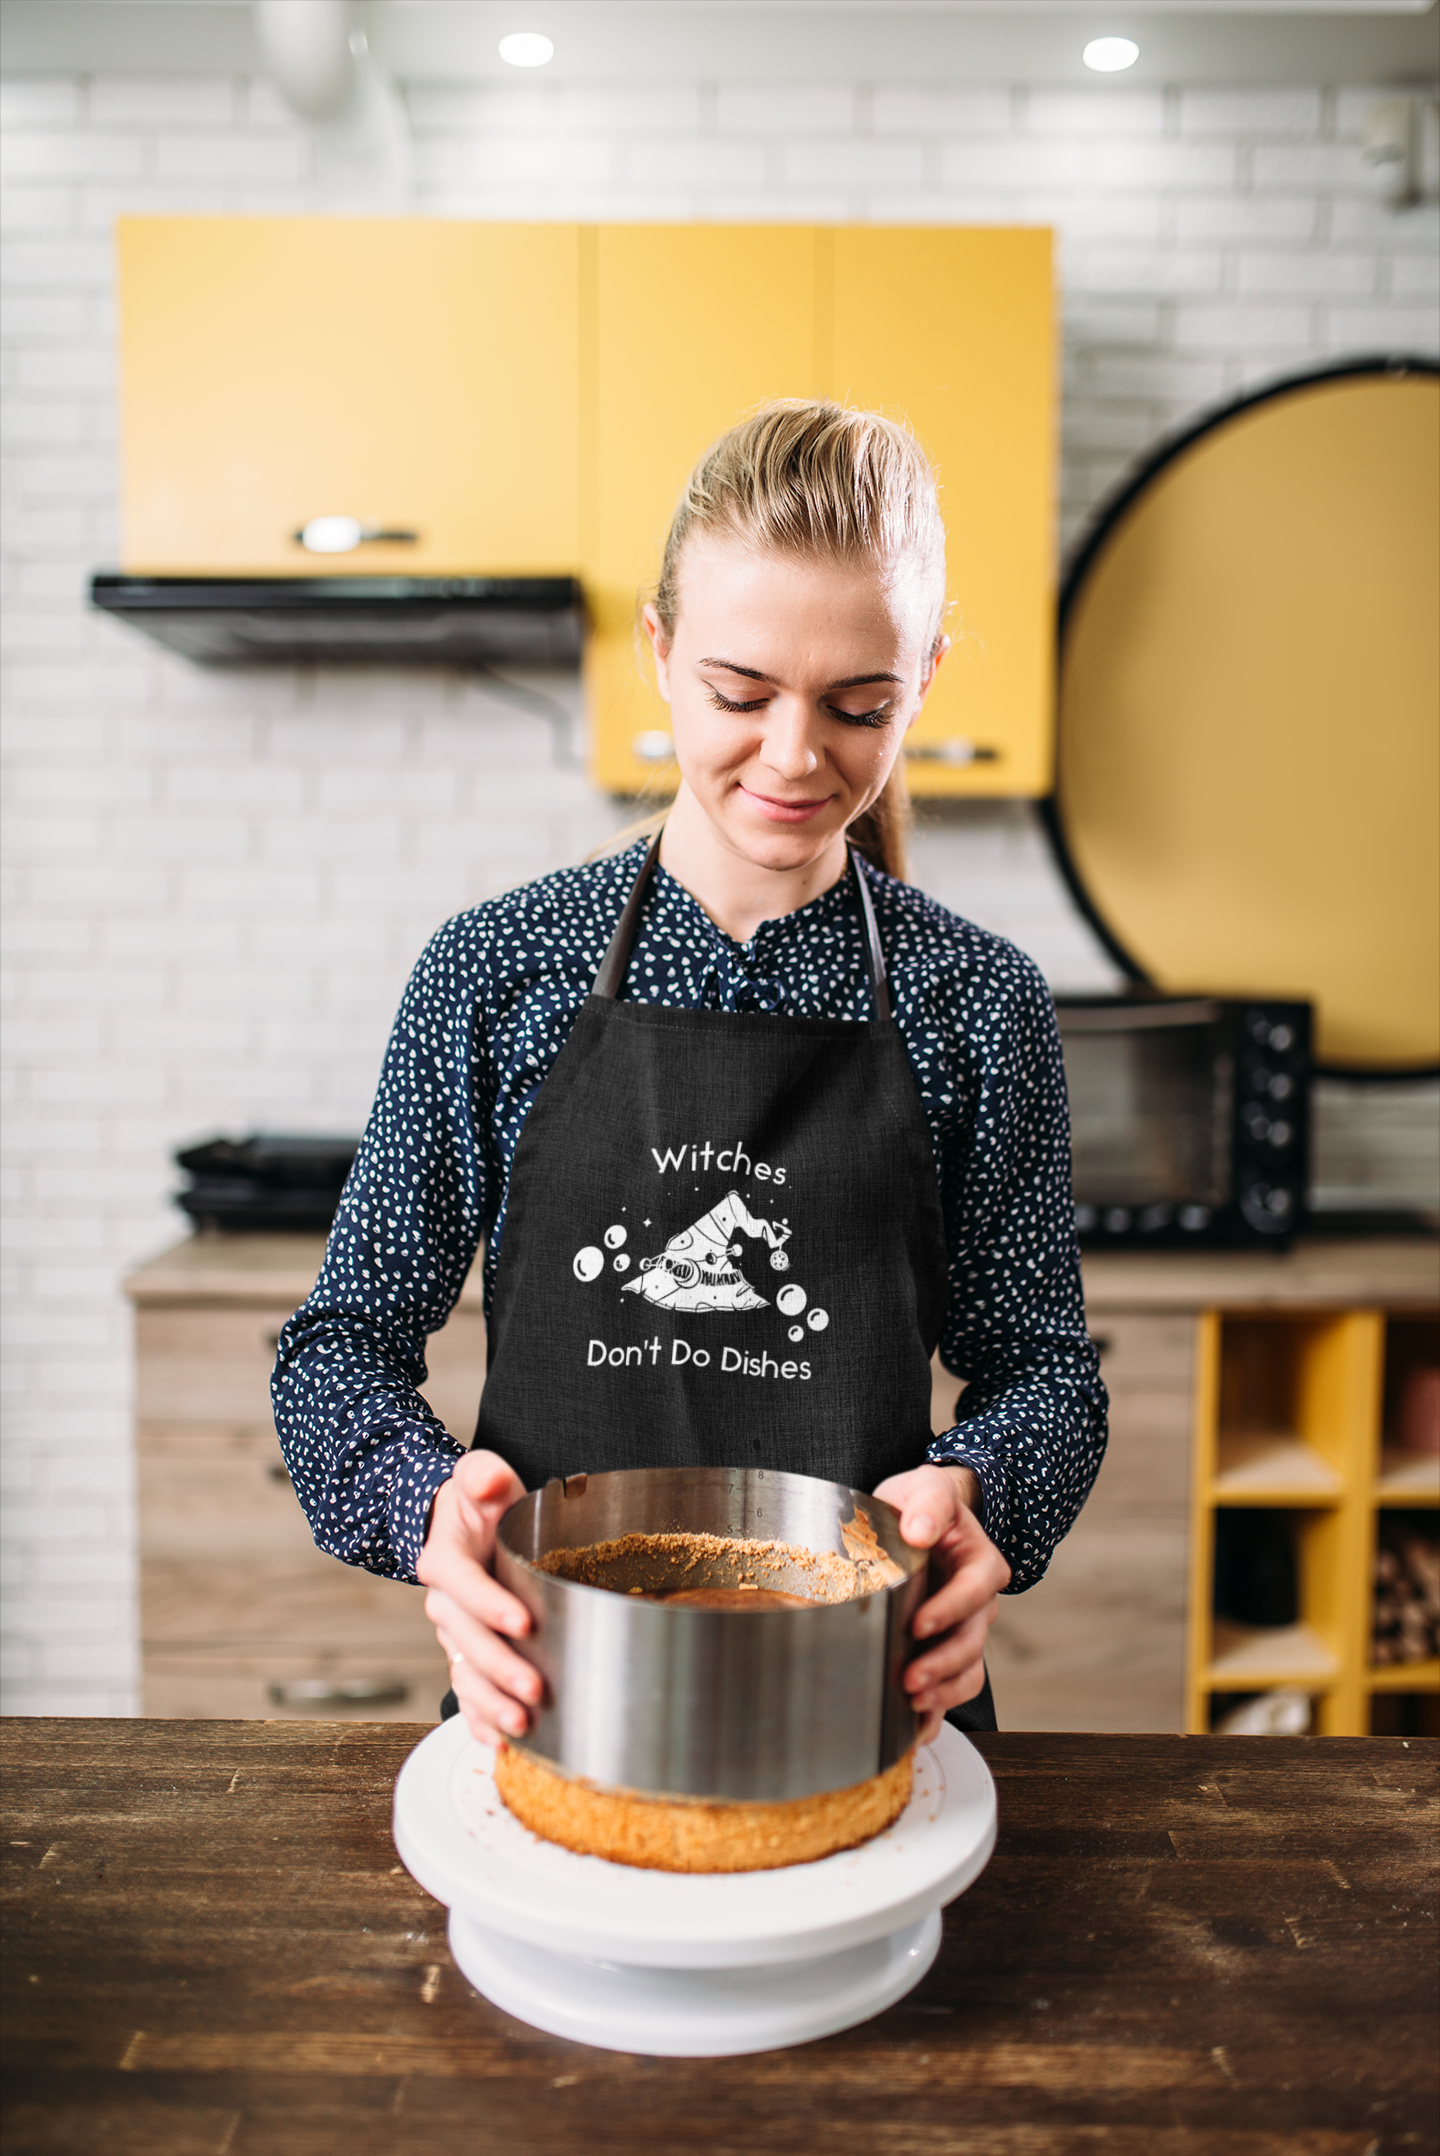 Witches Don't Do Dishes  Apron - Witchy Kitchens